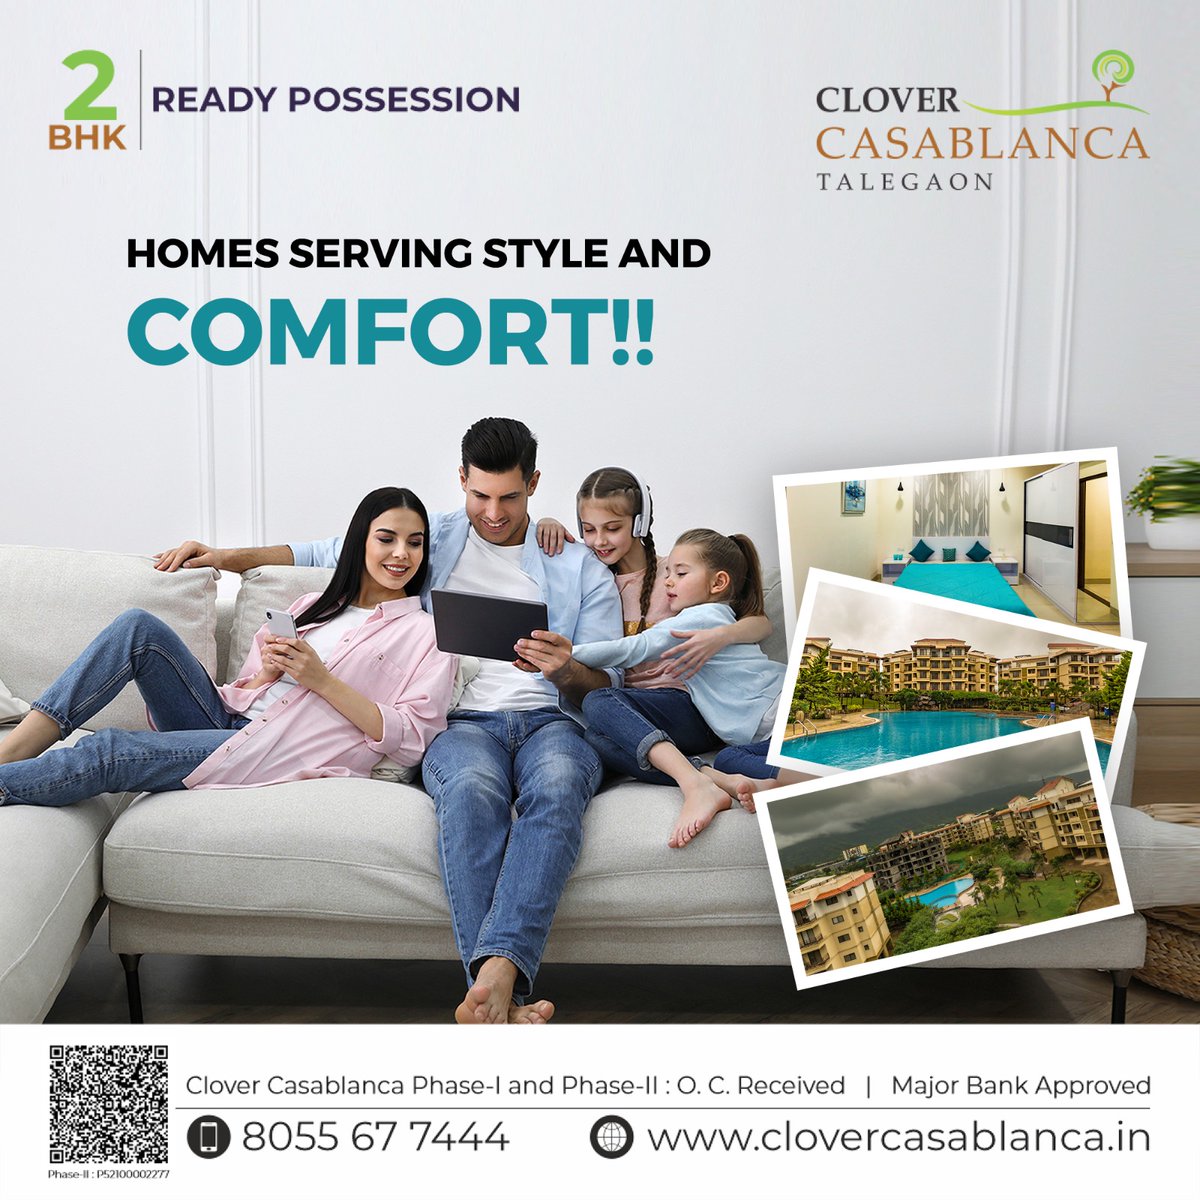 🏡✨ Discover Style and Comfort in Ready Possession 2 BHK Homes at Clover Casablanca, Talegaon! ✨🏡🌟
📞 Call: 8055 37 7444
.
.
.
#CloverCasablanca #ReadyPossessionHomes #ModernLiving #DreamHome #LuxuryLiving #TalegaonLiving #HomeSweetHome #ComfortLiving #StylishHomes